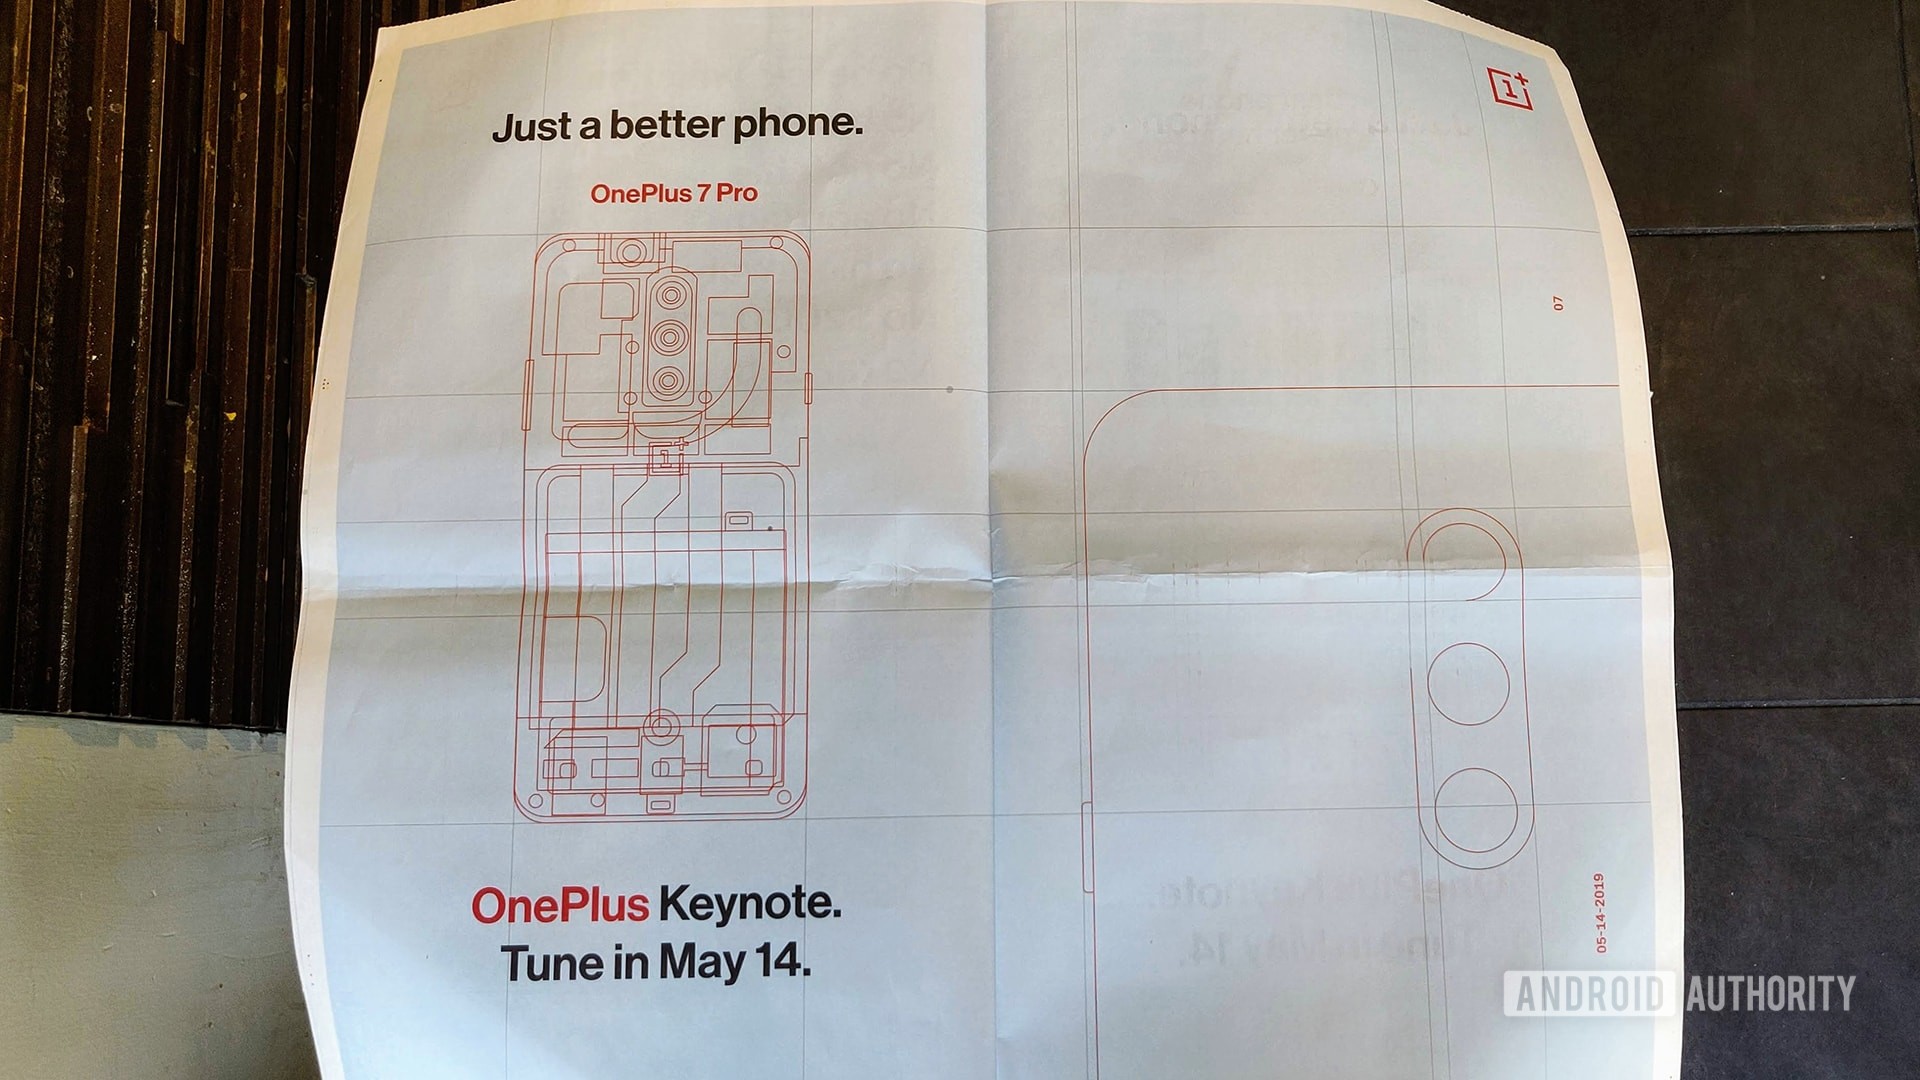 An image of the OnePlus advertisement in the New York Times on April 29, 2019.